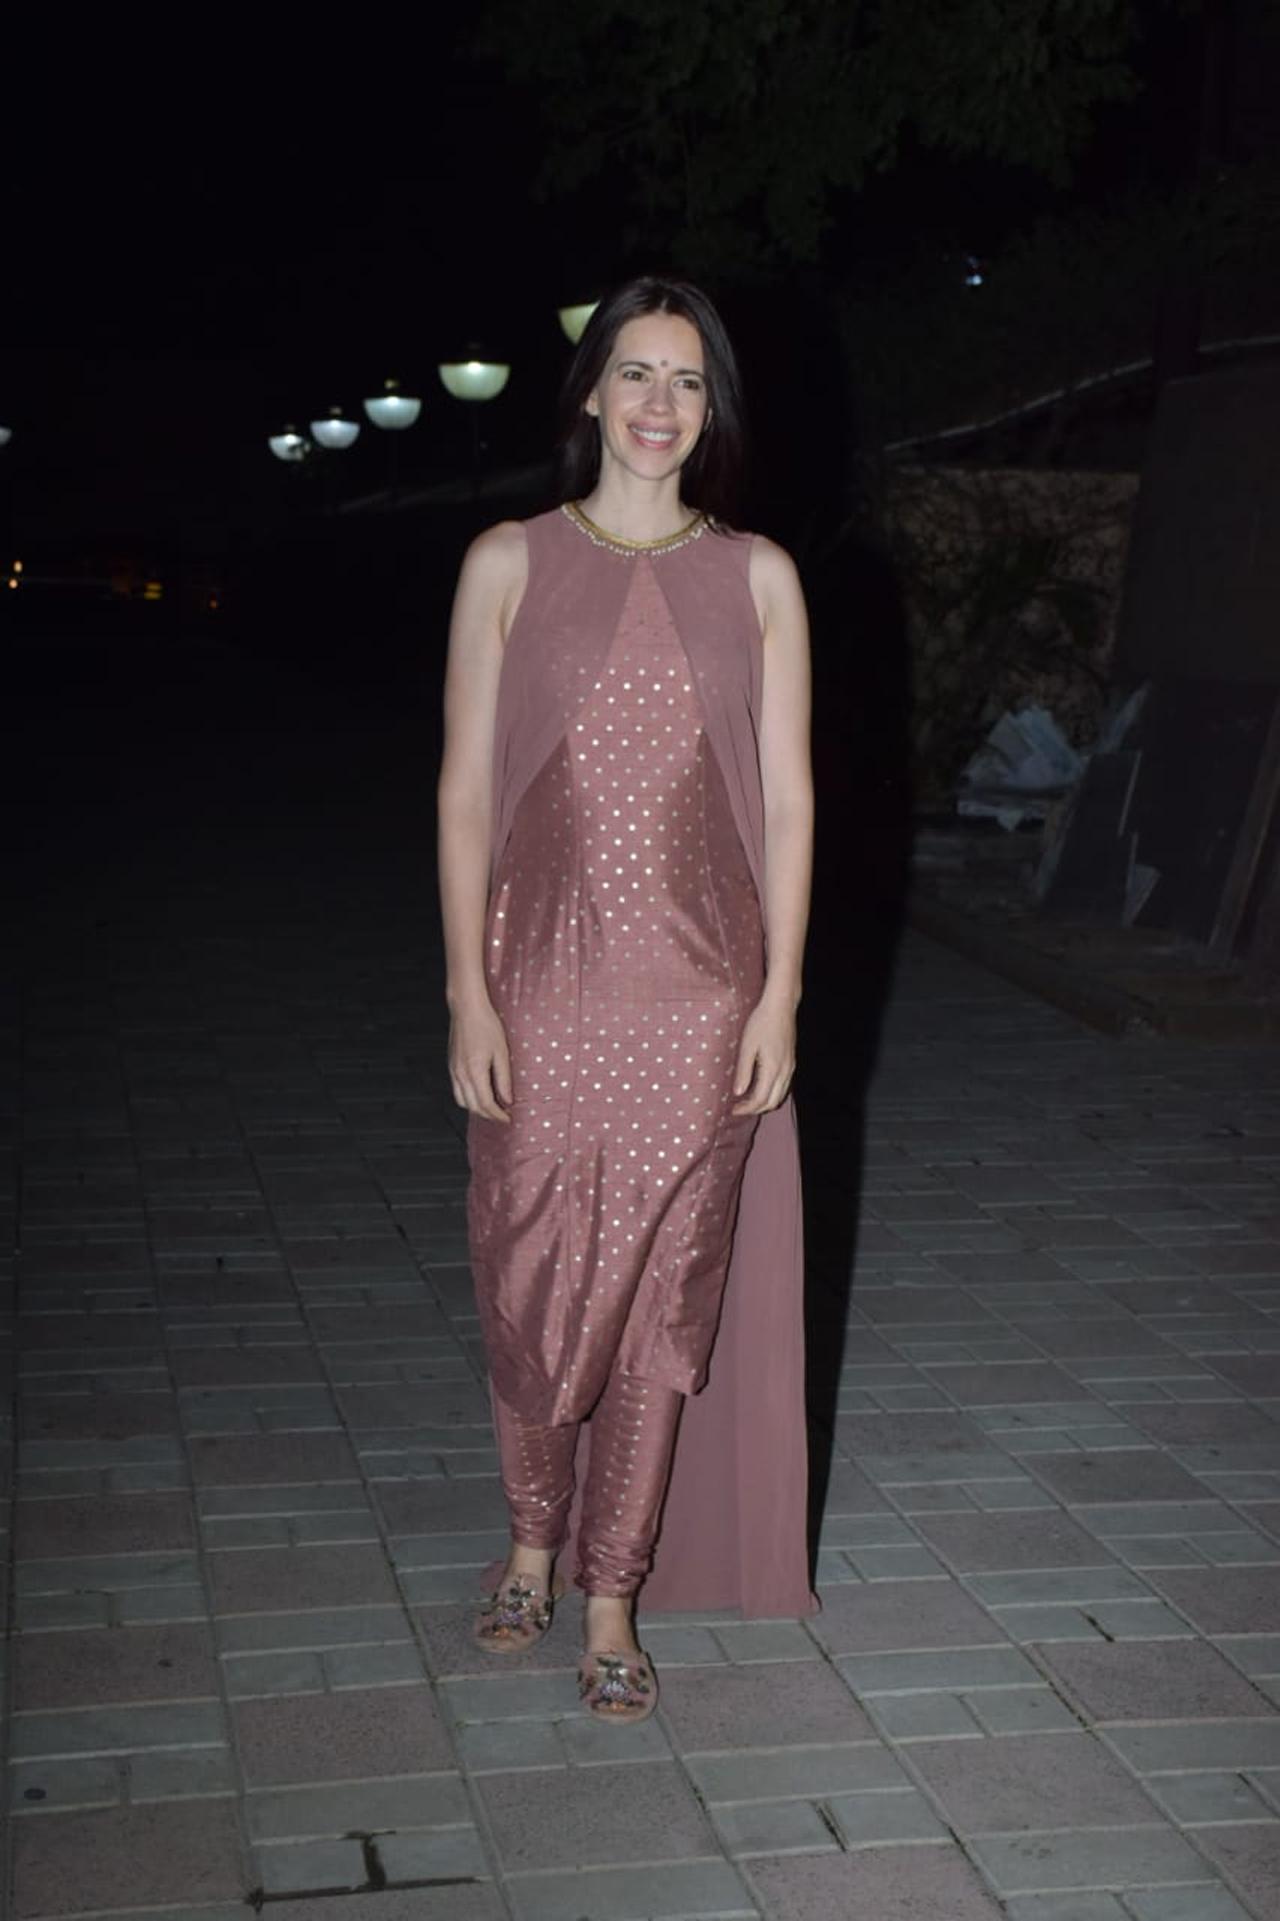 Kalki Koechlin made a rare public appearance at the screening. It seems like the actress arrived at the show to cheer her friend Deepika Padukone, for her digital debut.